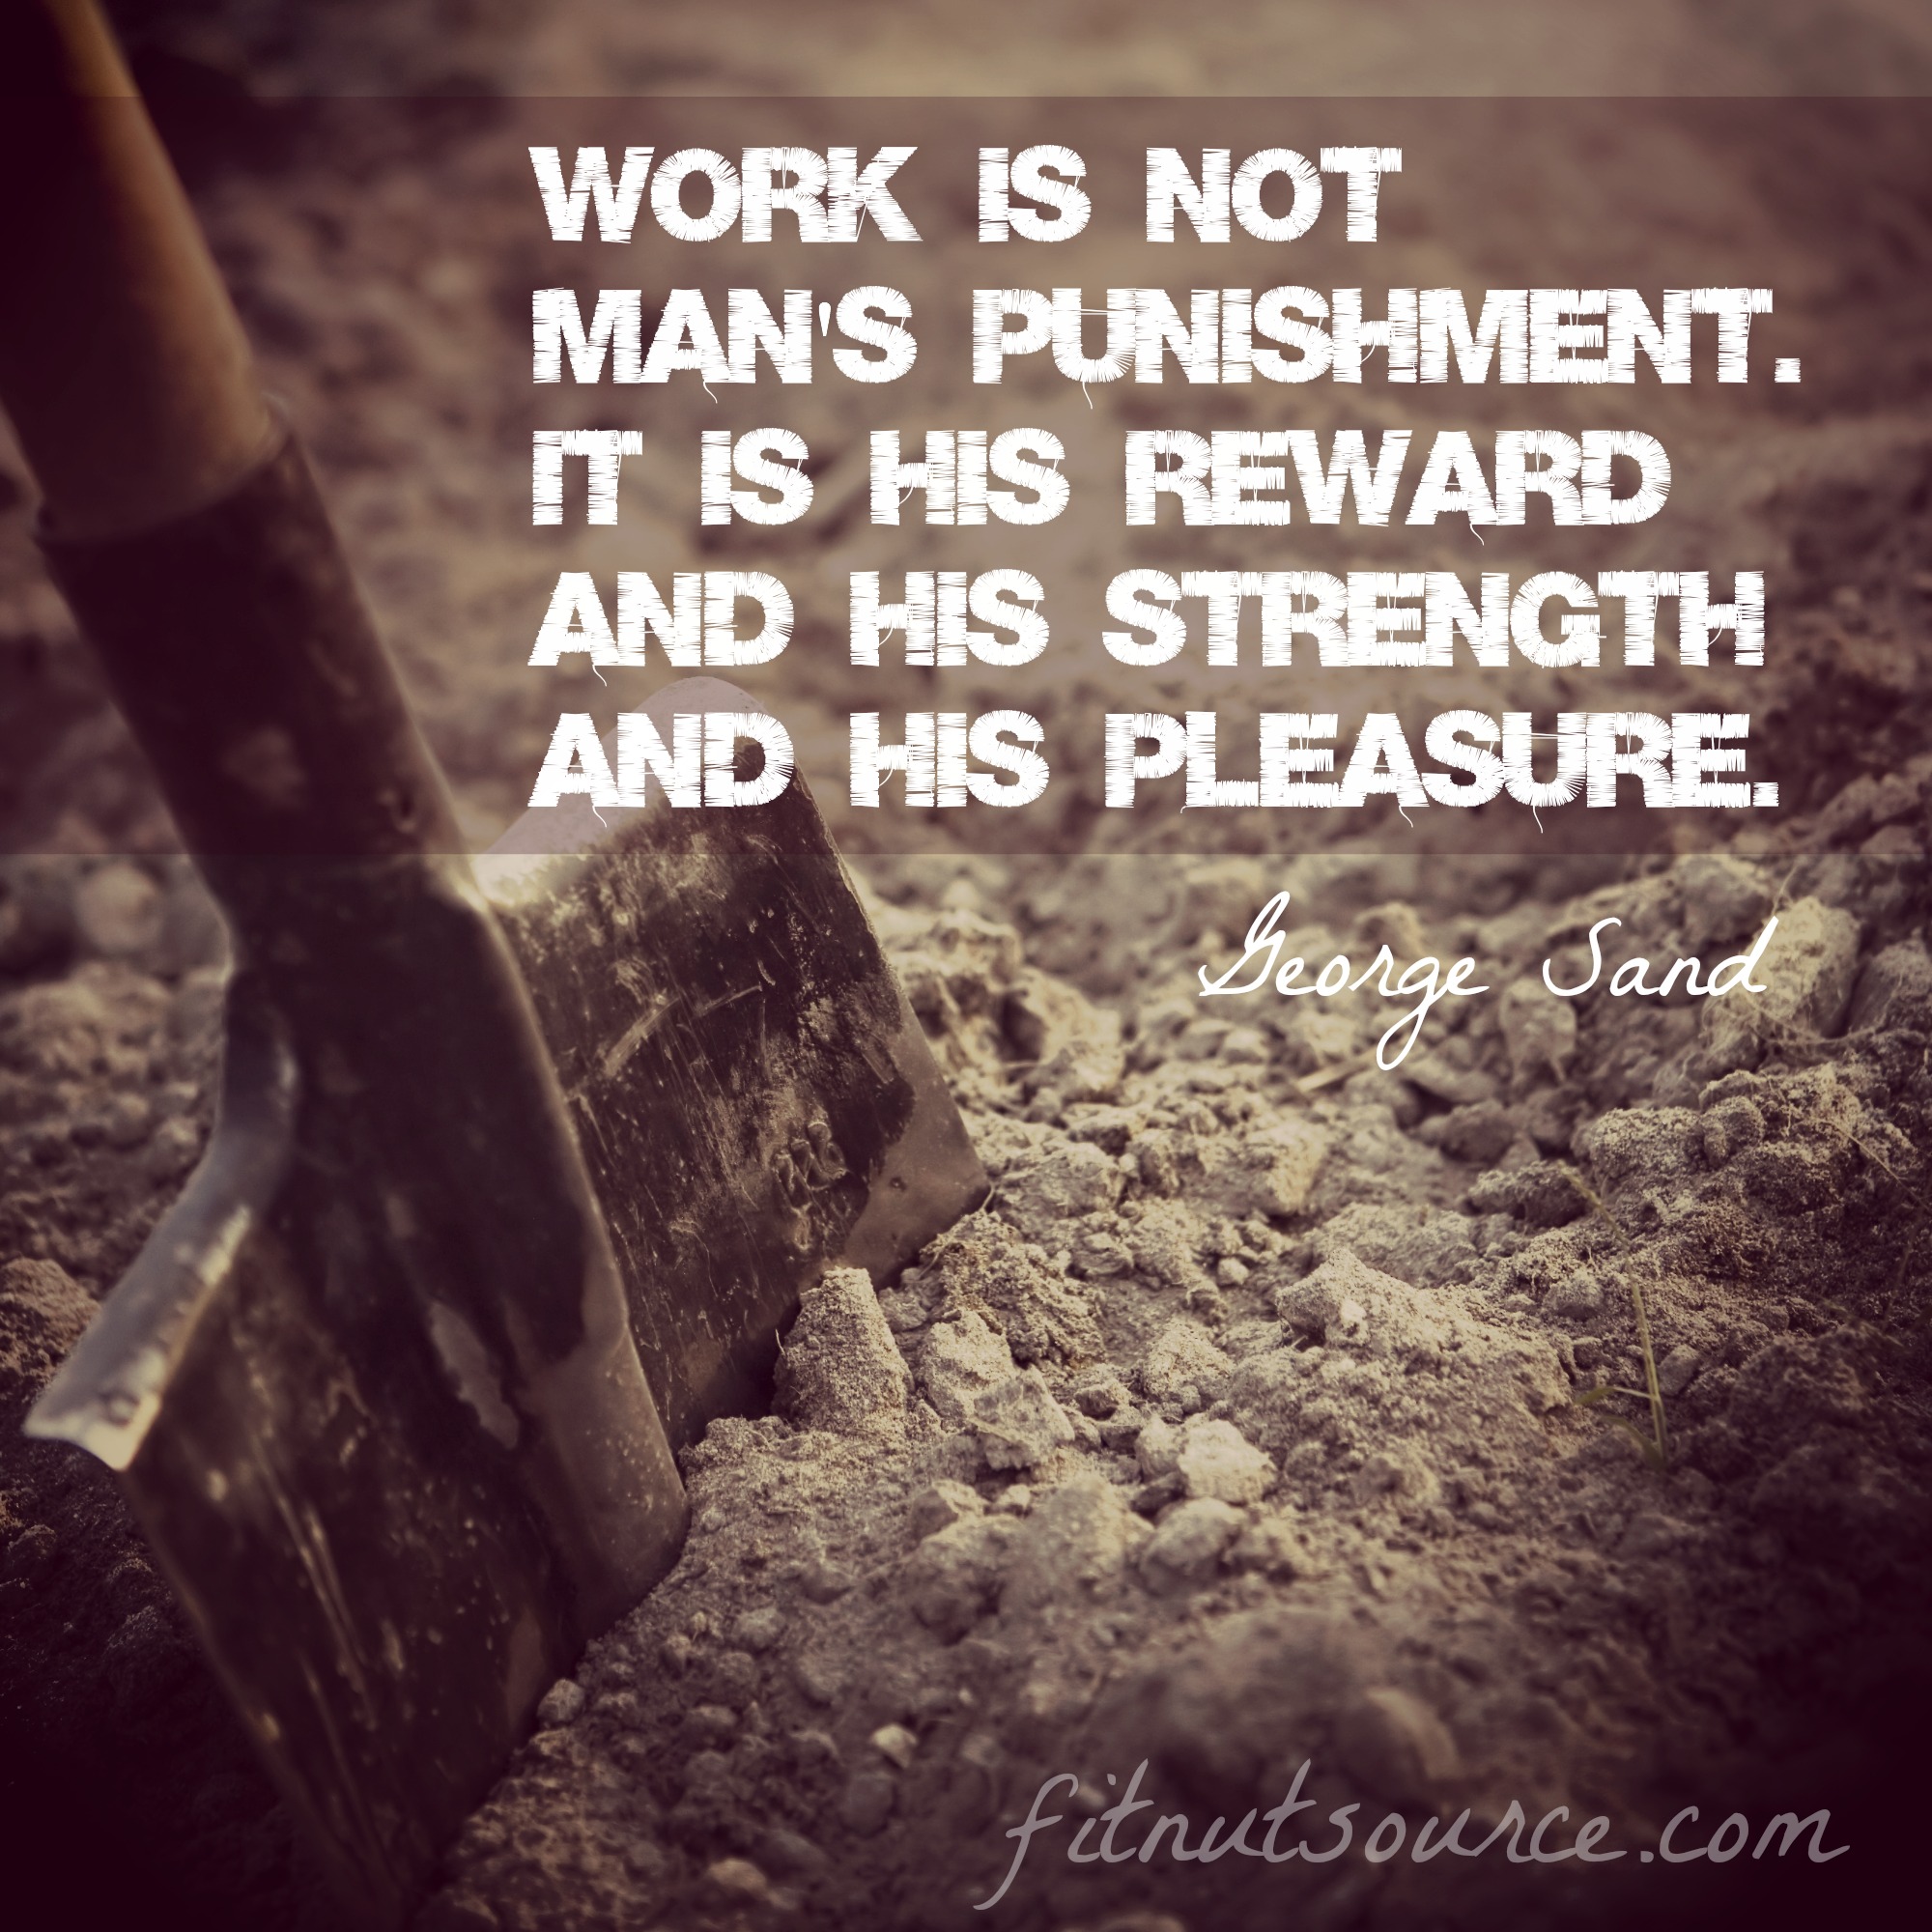 Work is not mans punishment. It is his reward and his strength and his pleasure. George Sand